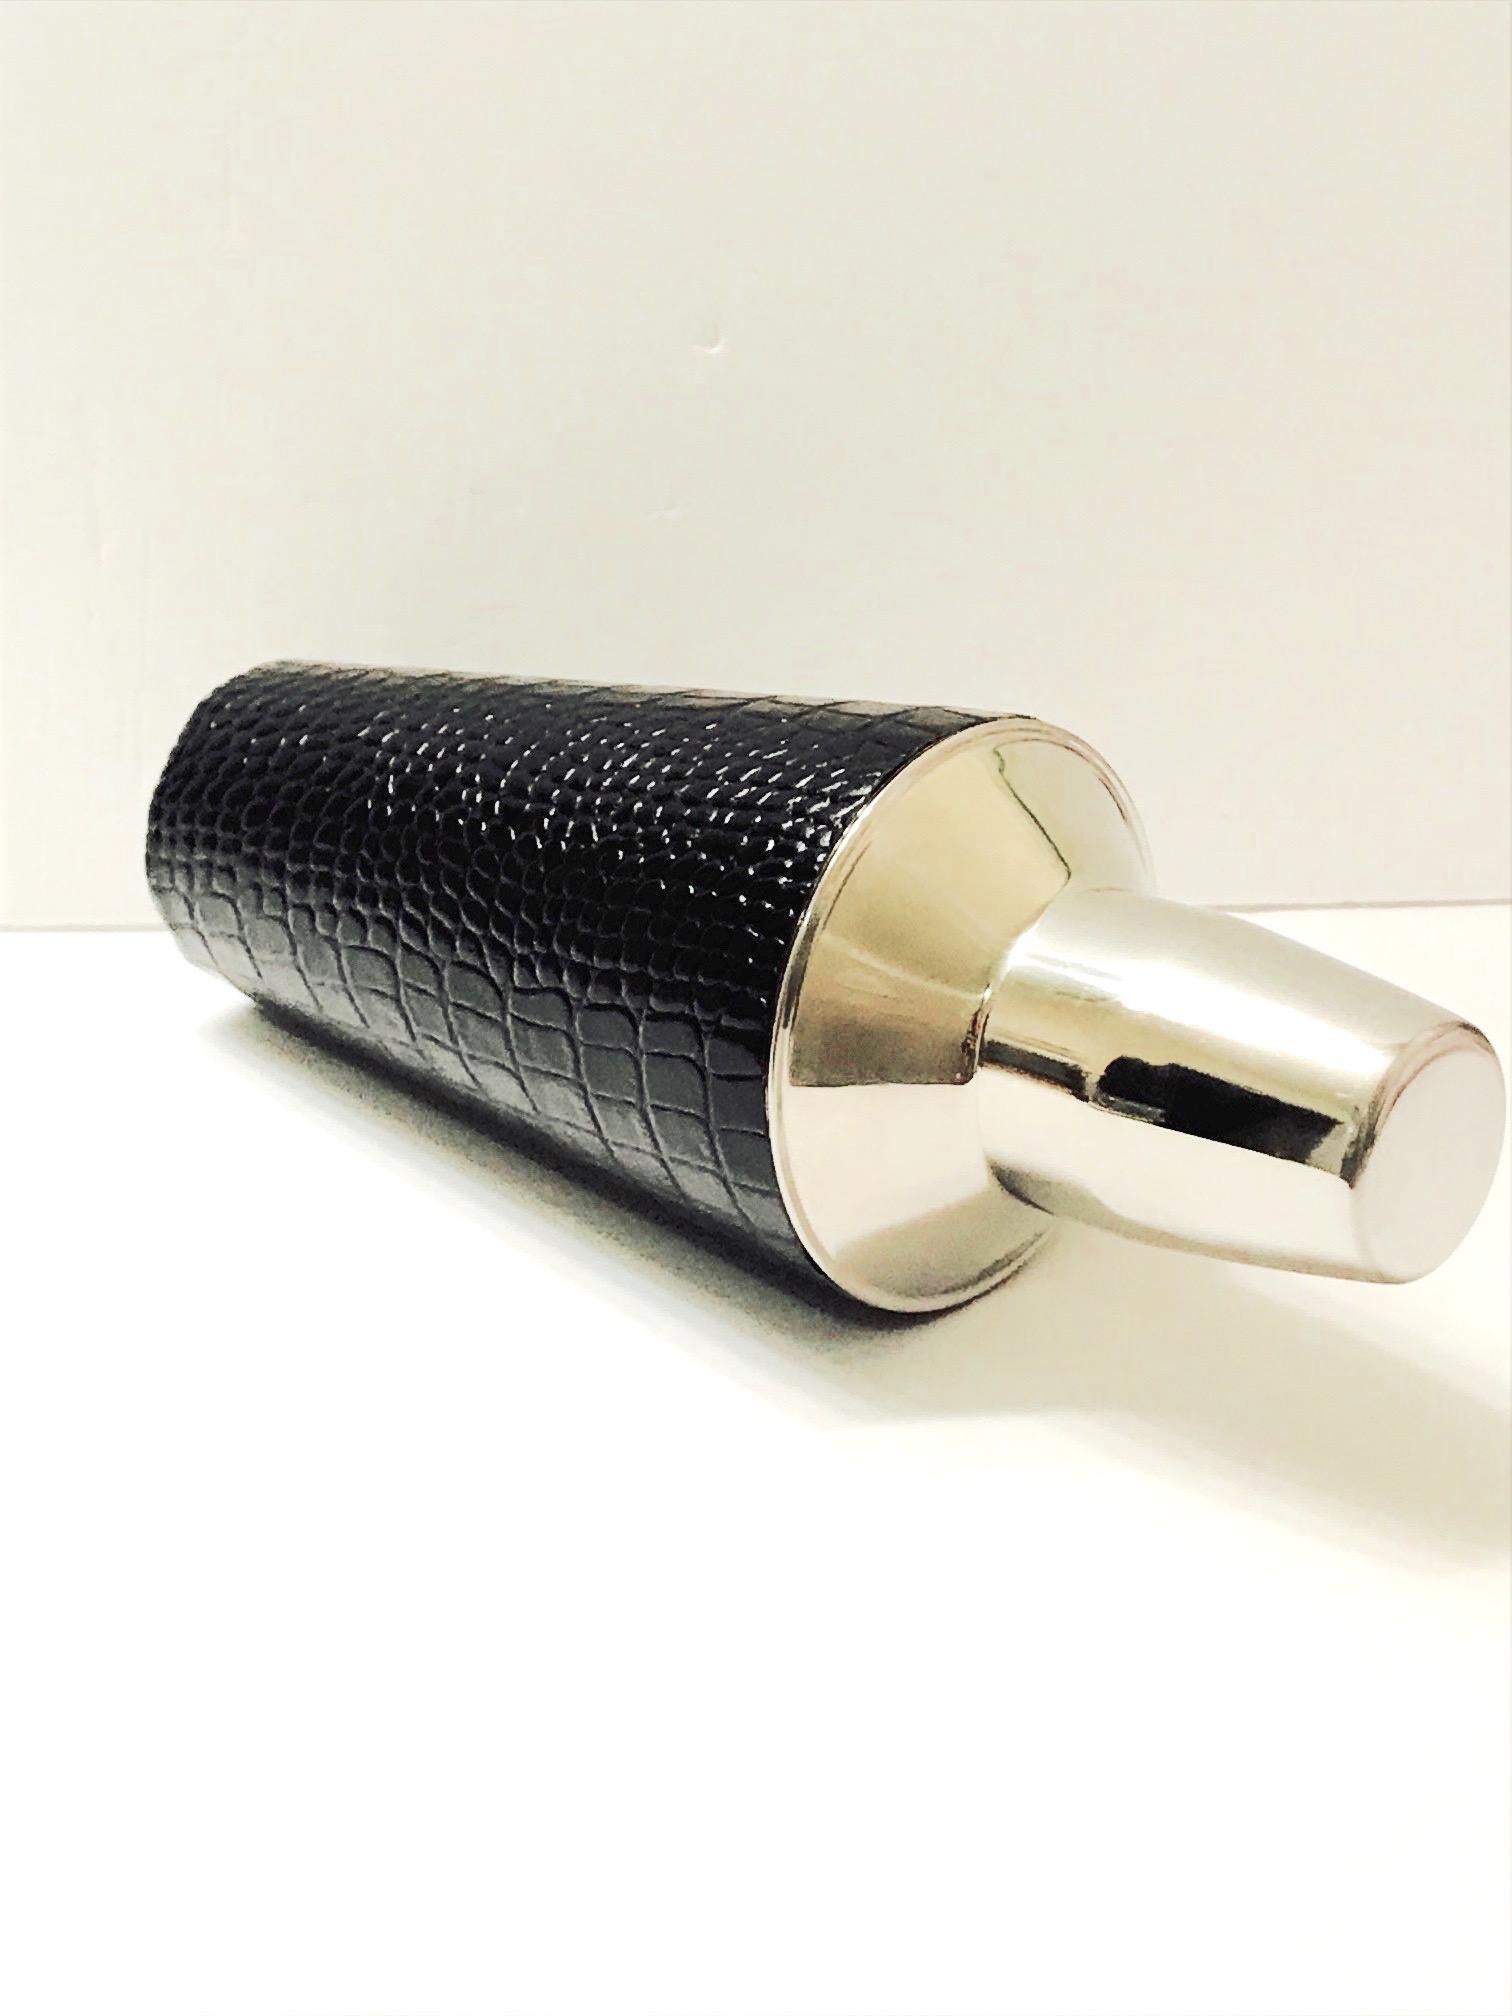 leather cocktail shaker